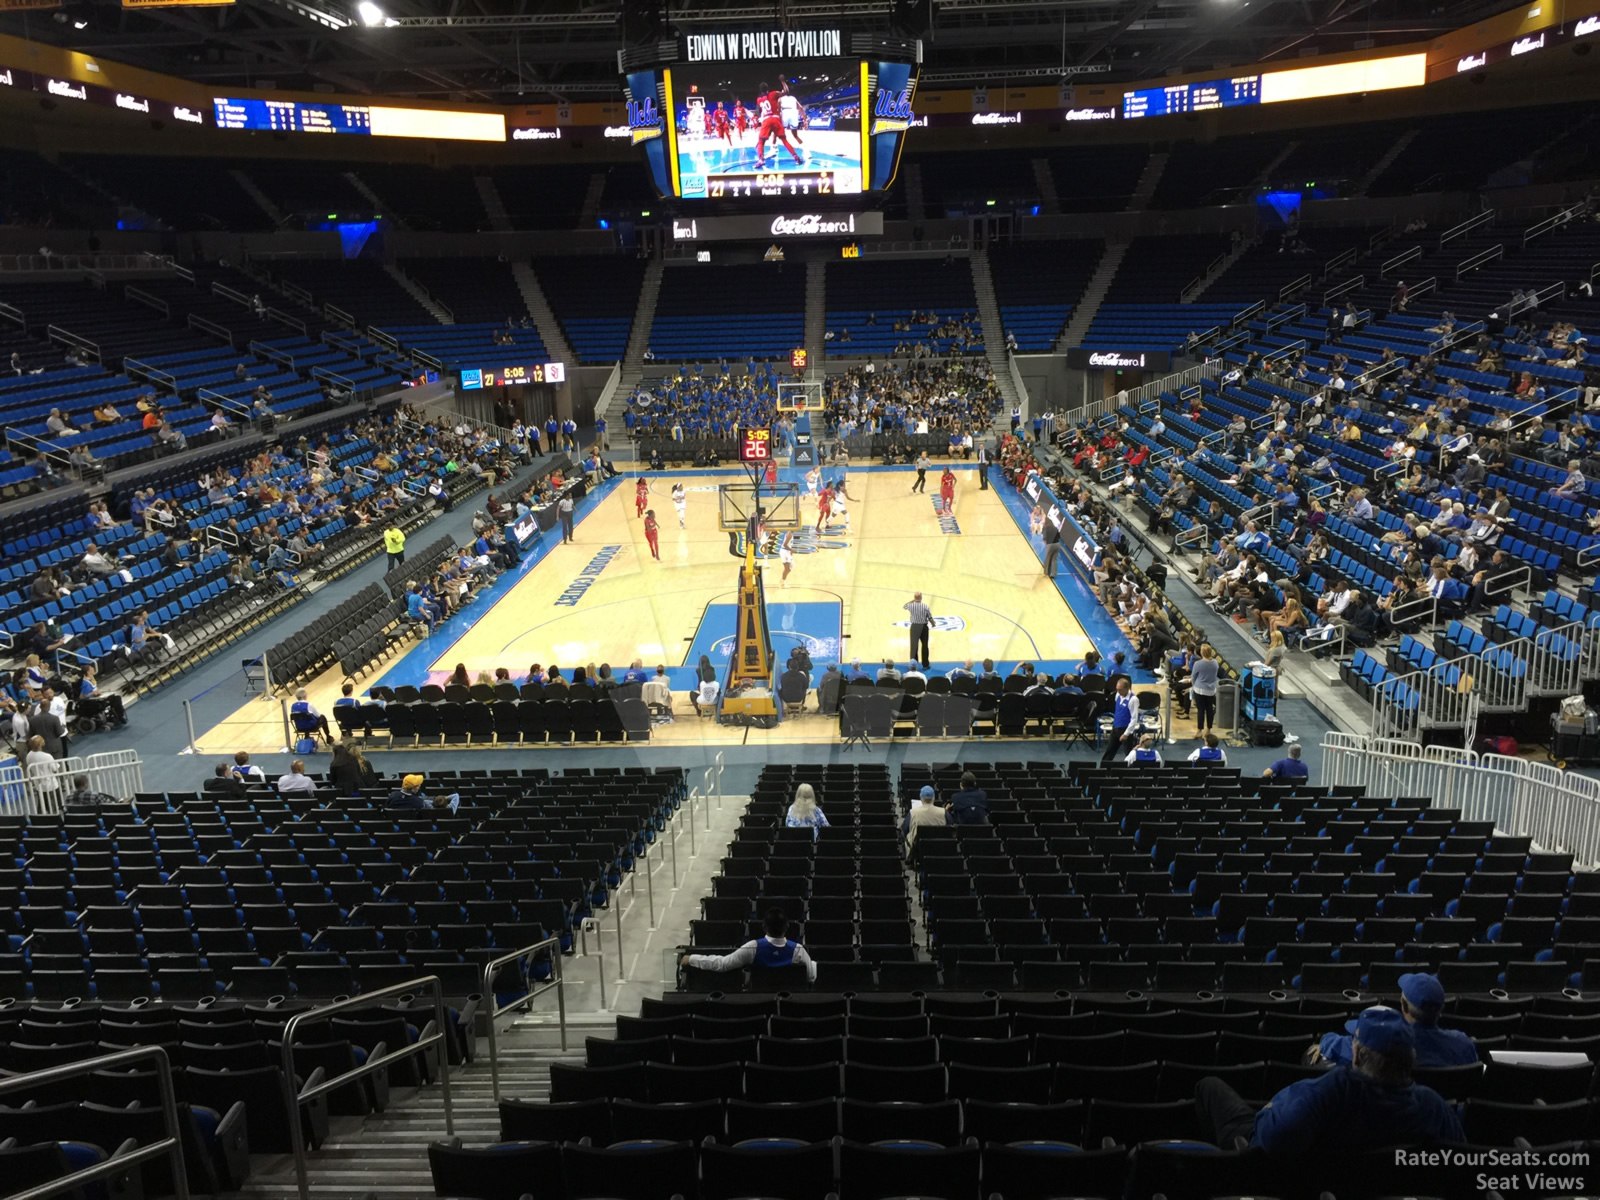 section 108, row 13 seat view  - pauley pavilion